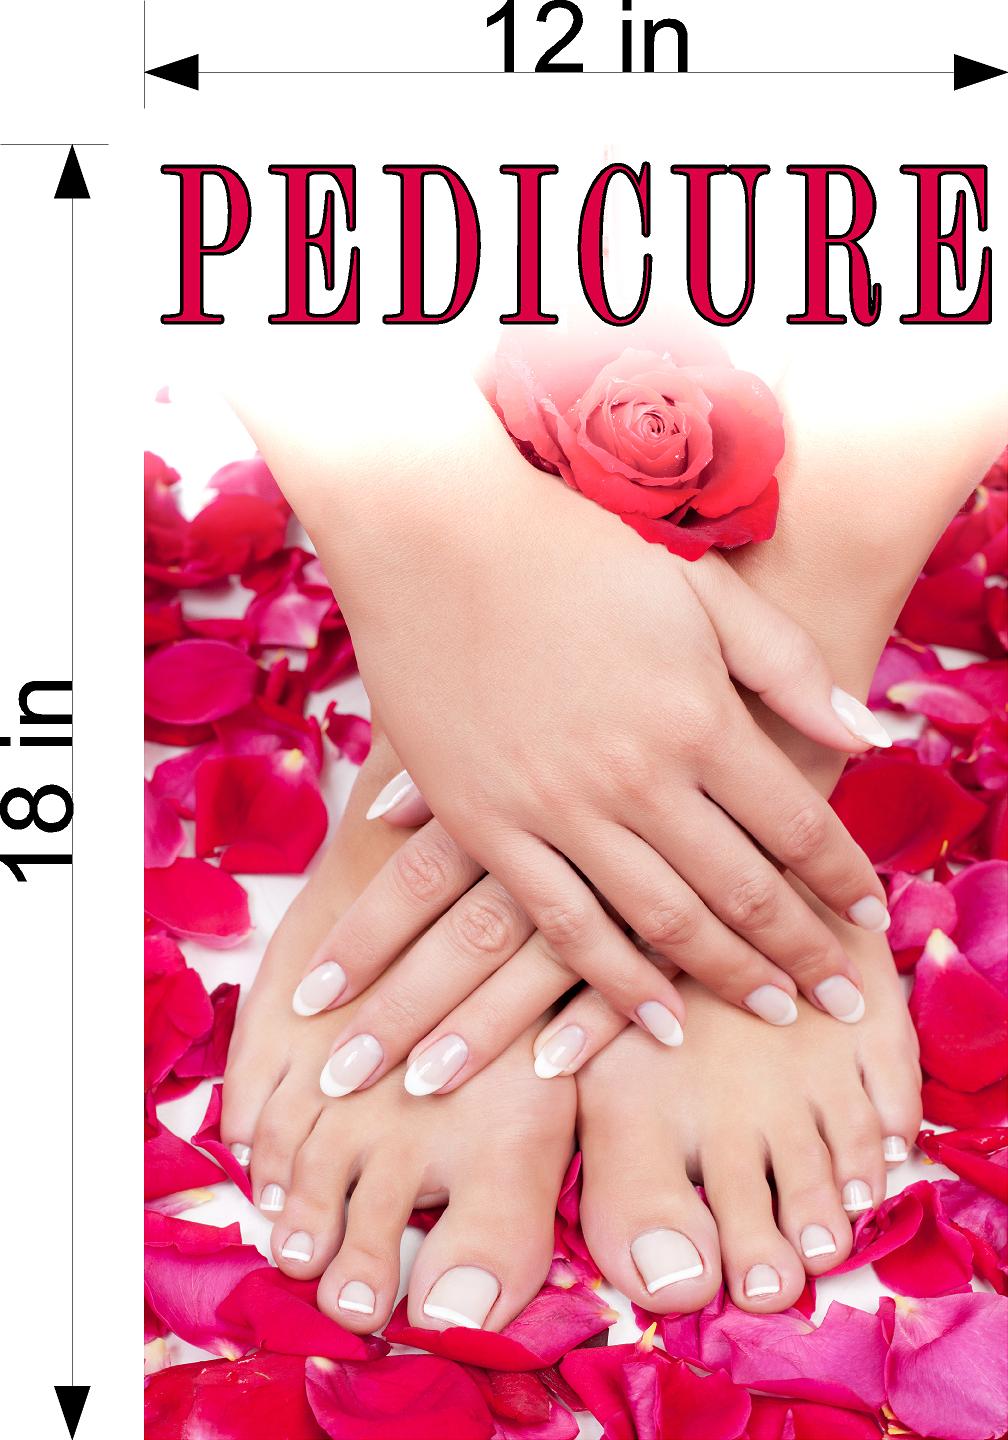 Pedicure 07 Wallpaper Poster Decal with Adhesive Backing Wall Sticker Decor Indoors Interior Sign Vertical